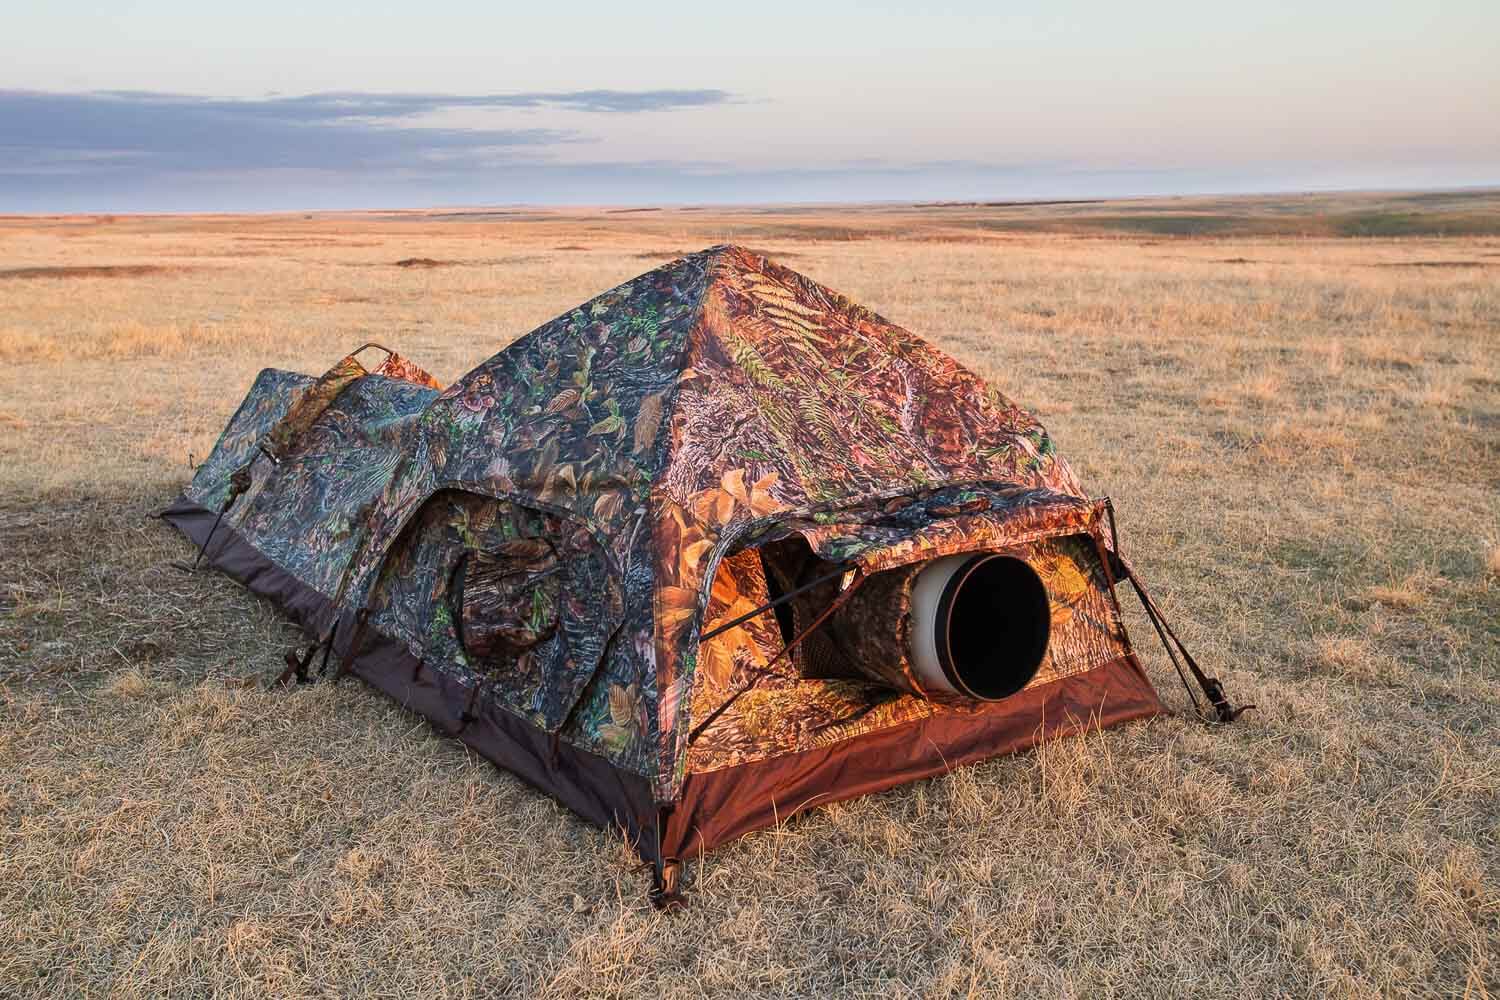 Camo-patterned tent set up in a grassy field at dusk.